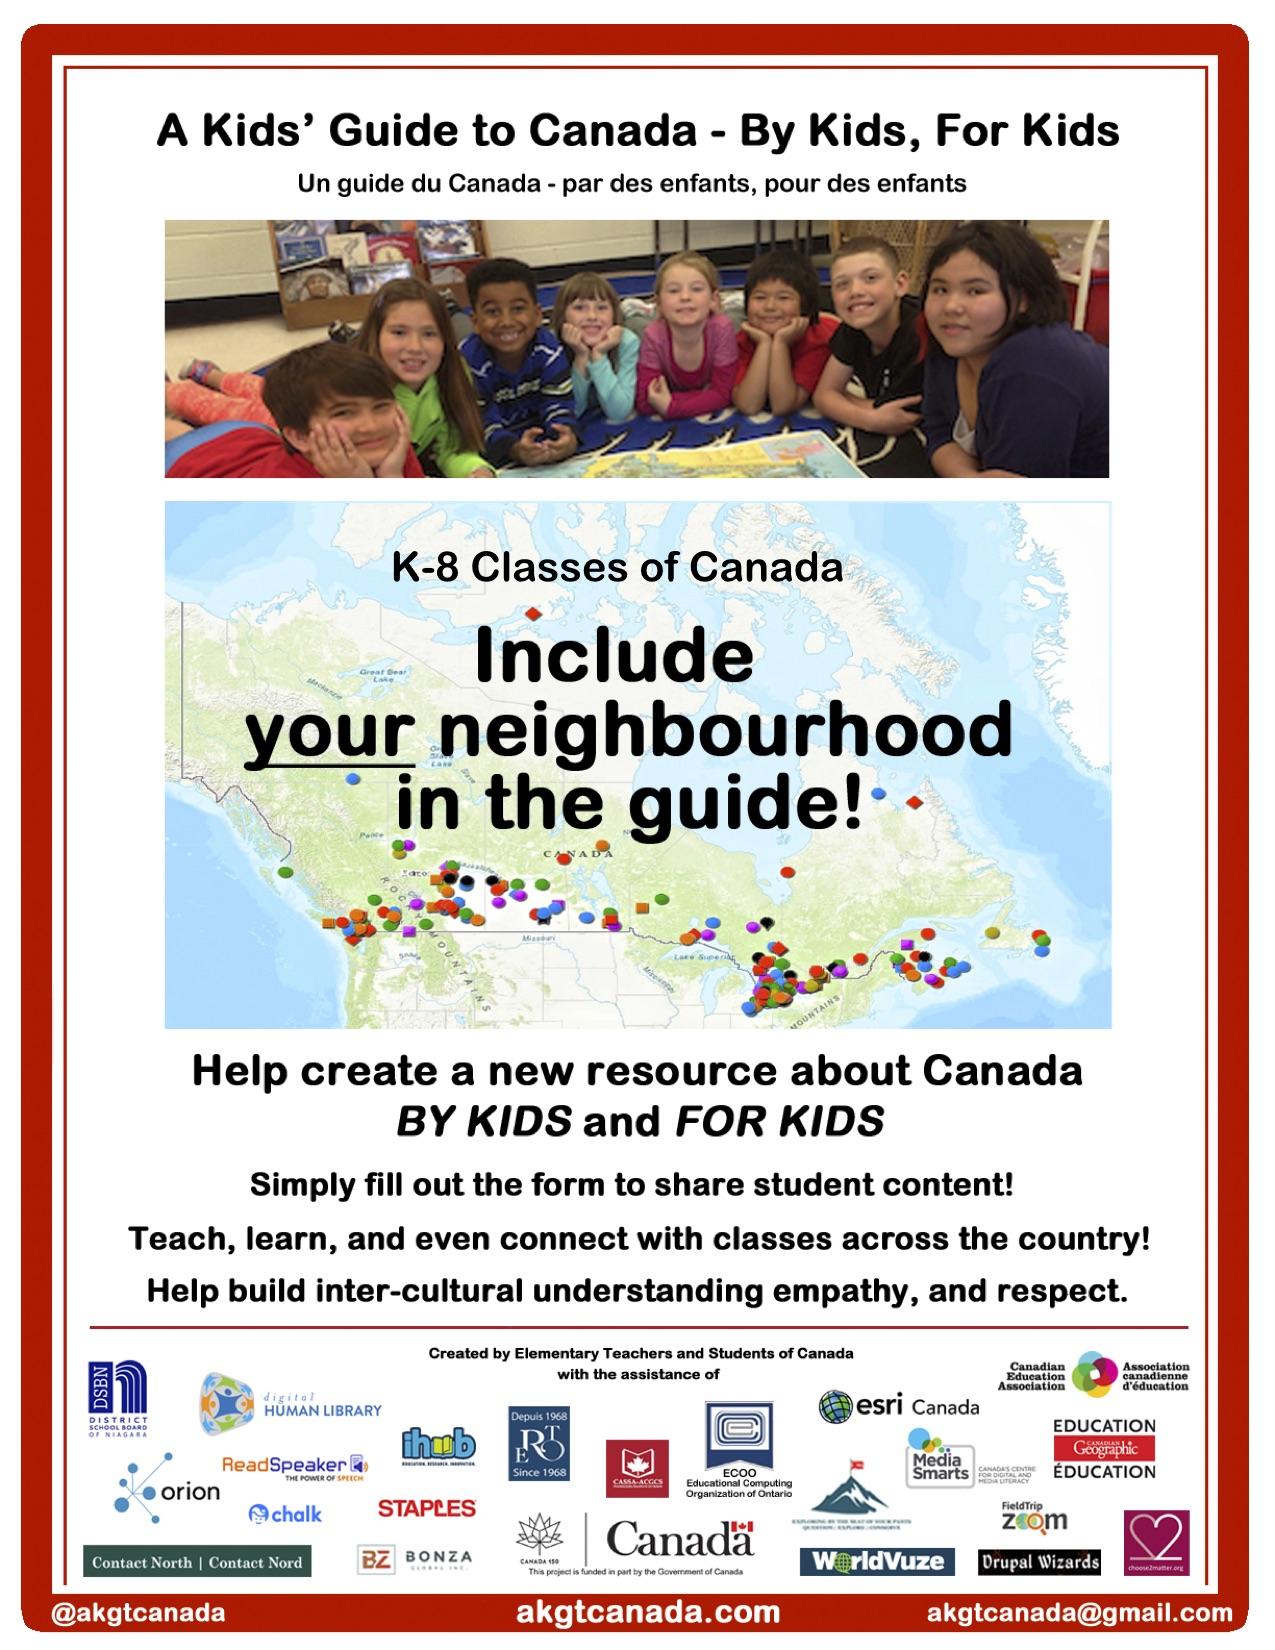 A kid's guide to Canada - by kids for kids